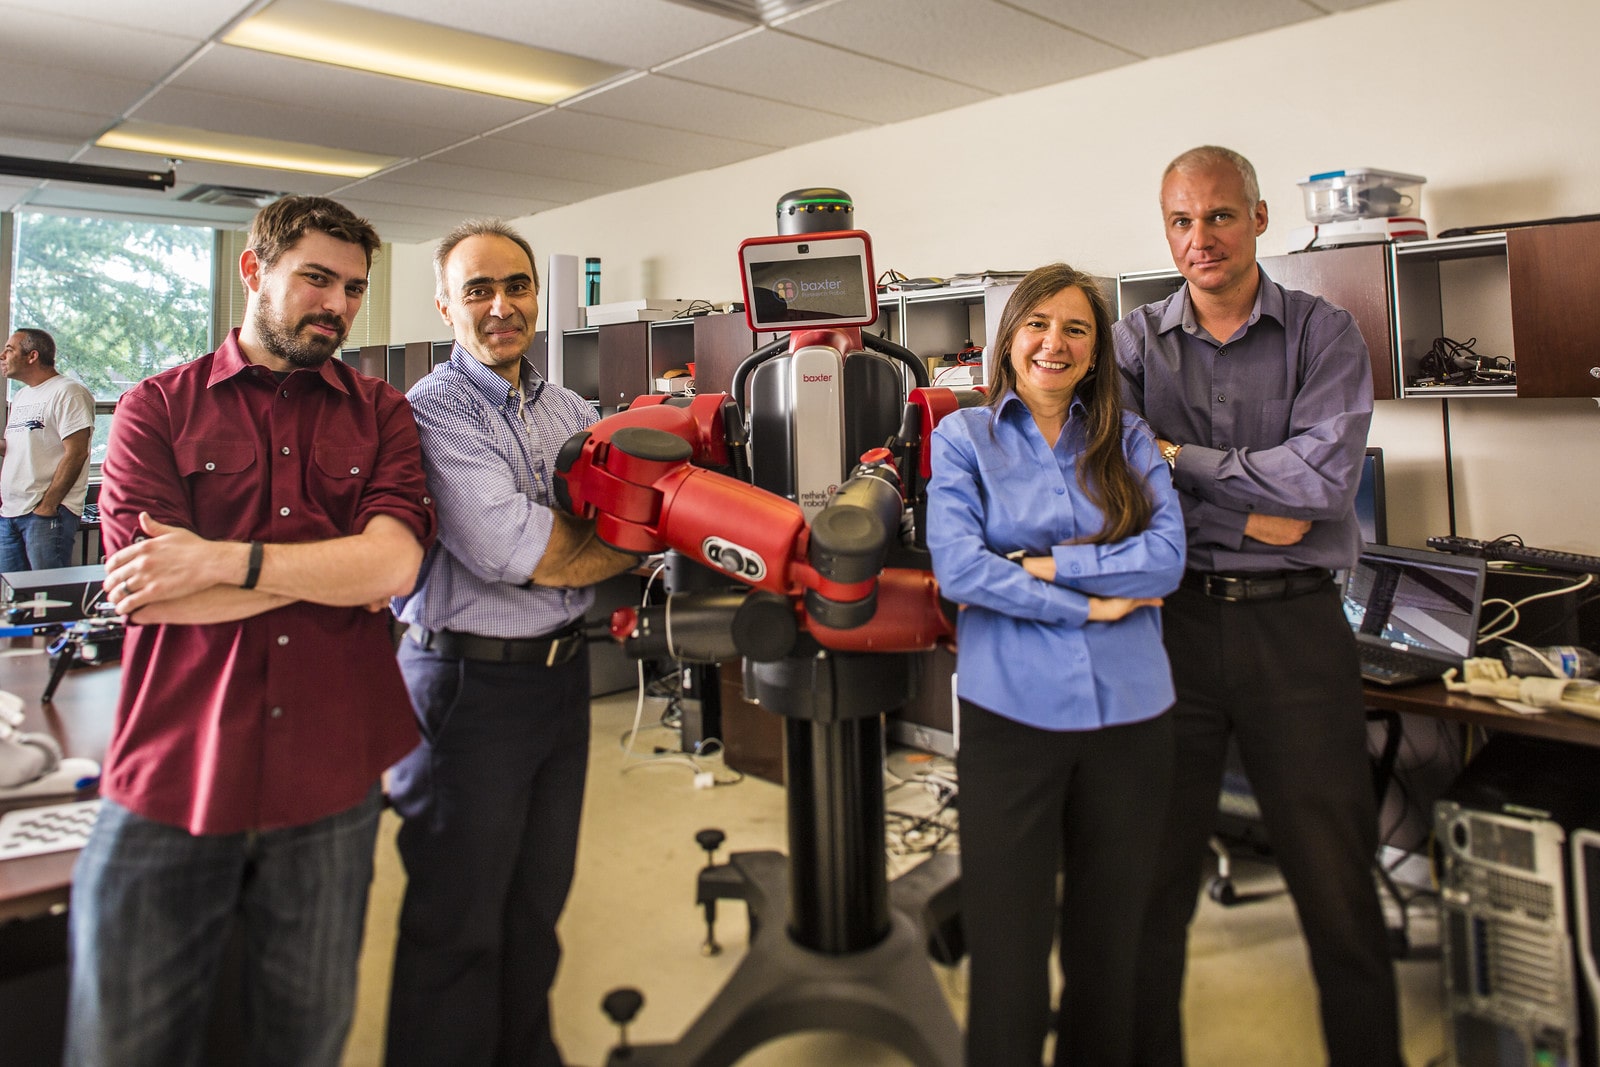 Engineers and other professionals standing inline with a red Baxter robot in a well lit robotics lab.